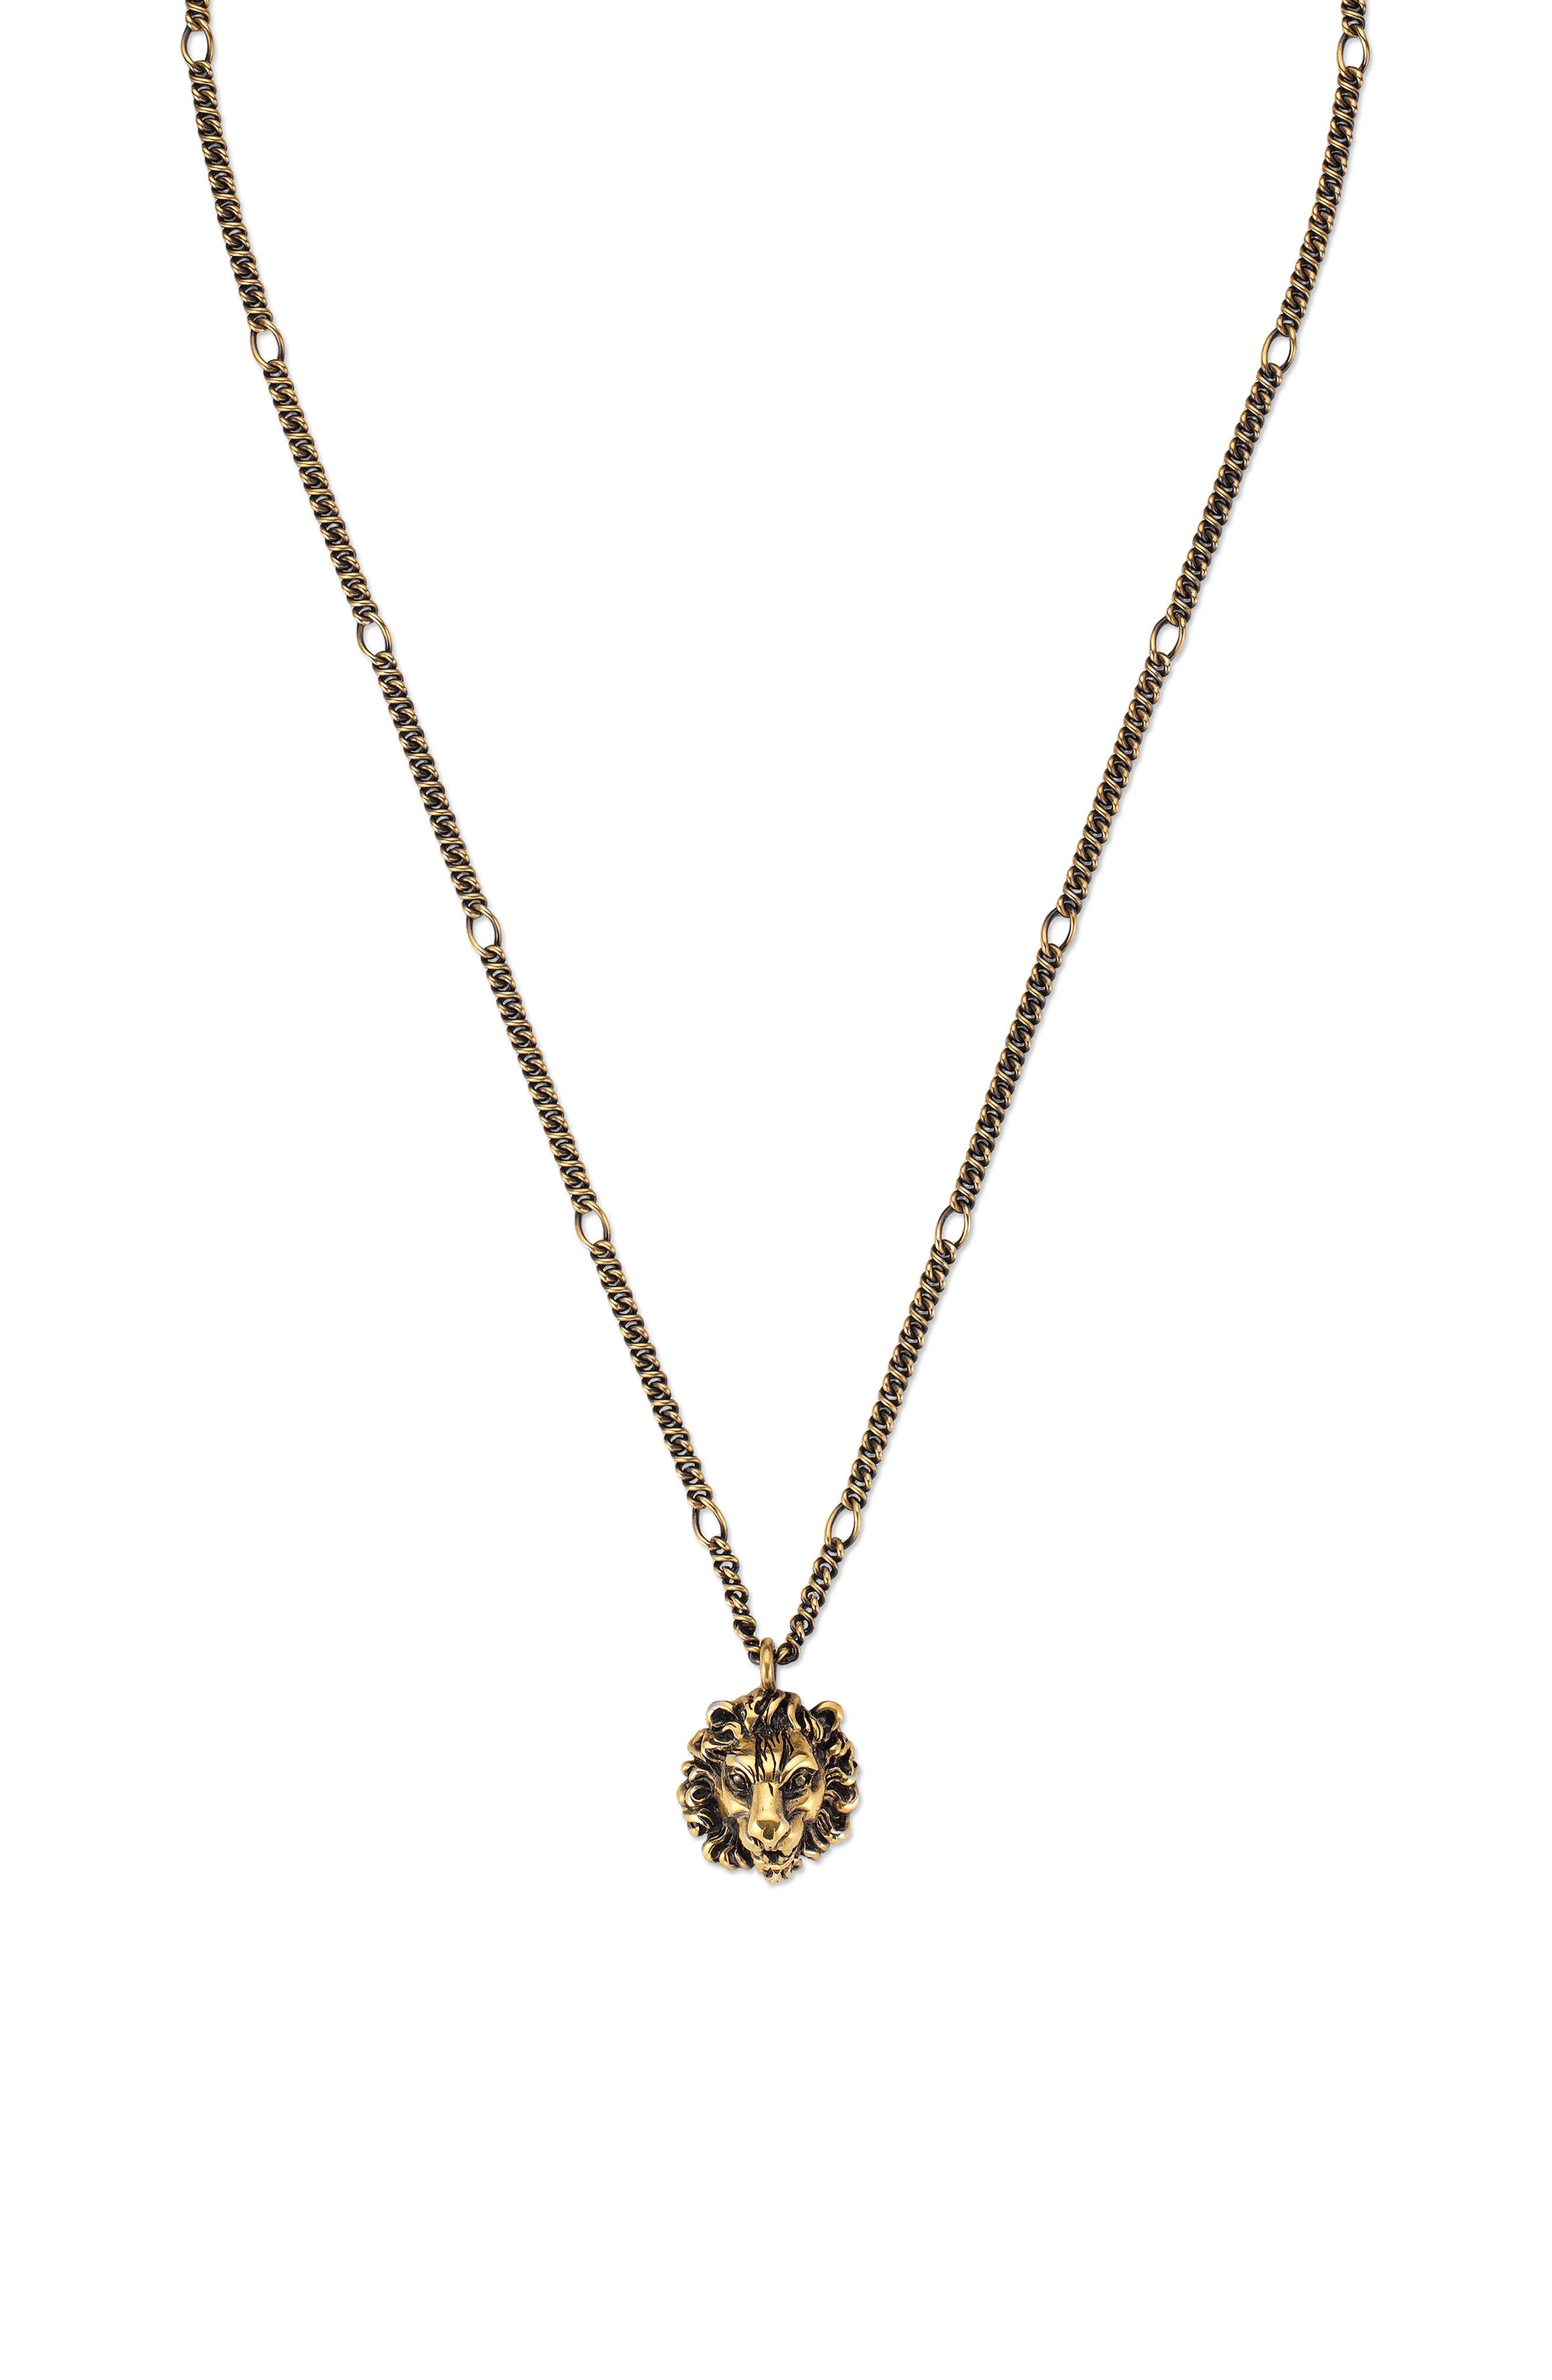 gucci necklace with lion head pendant